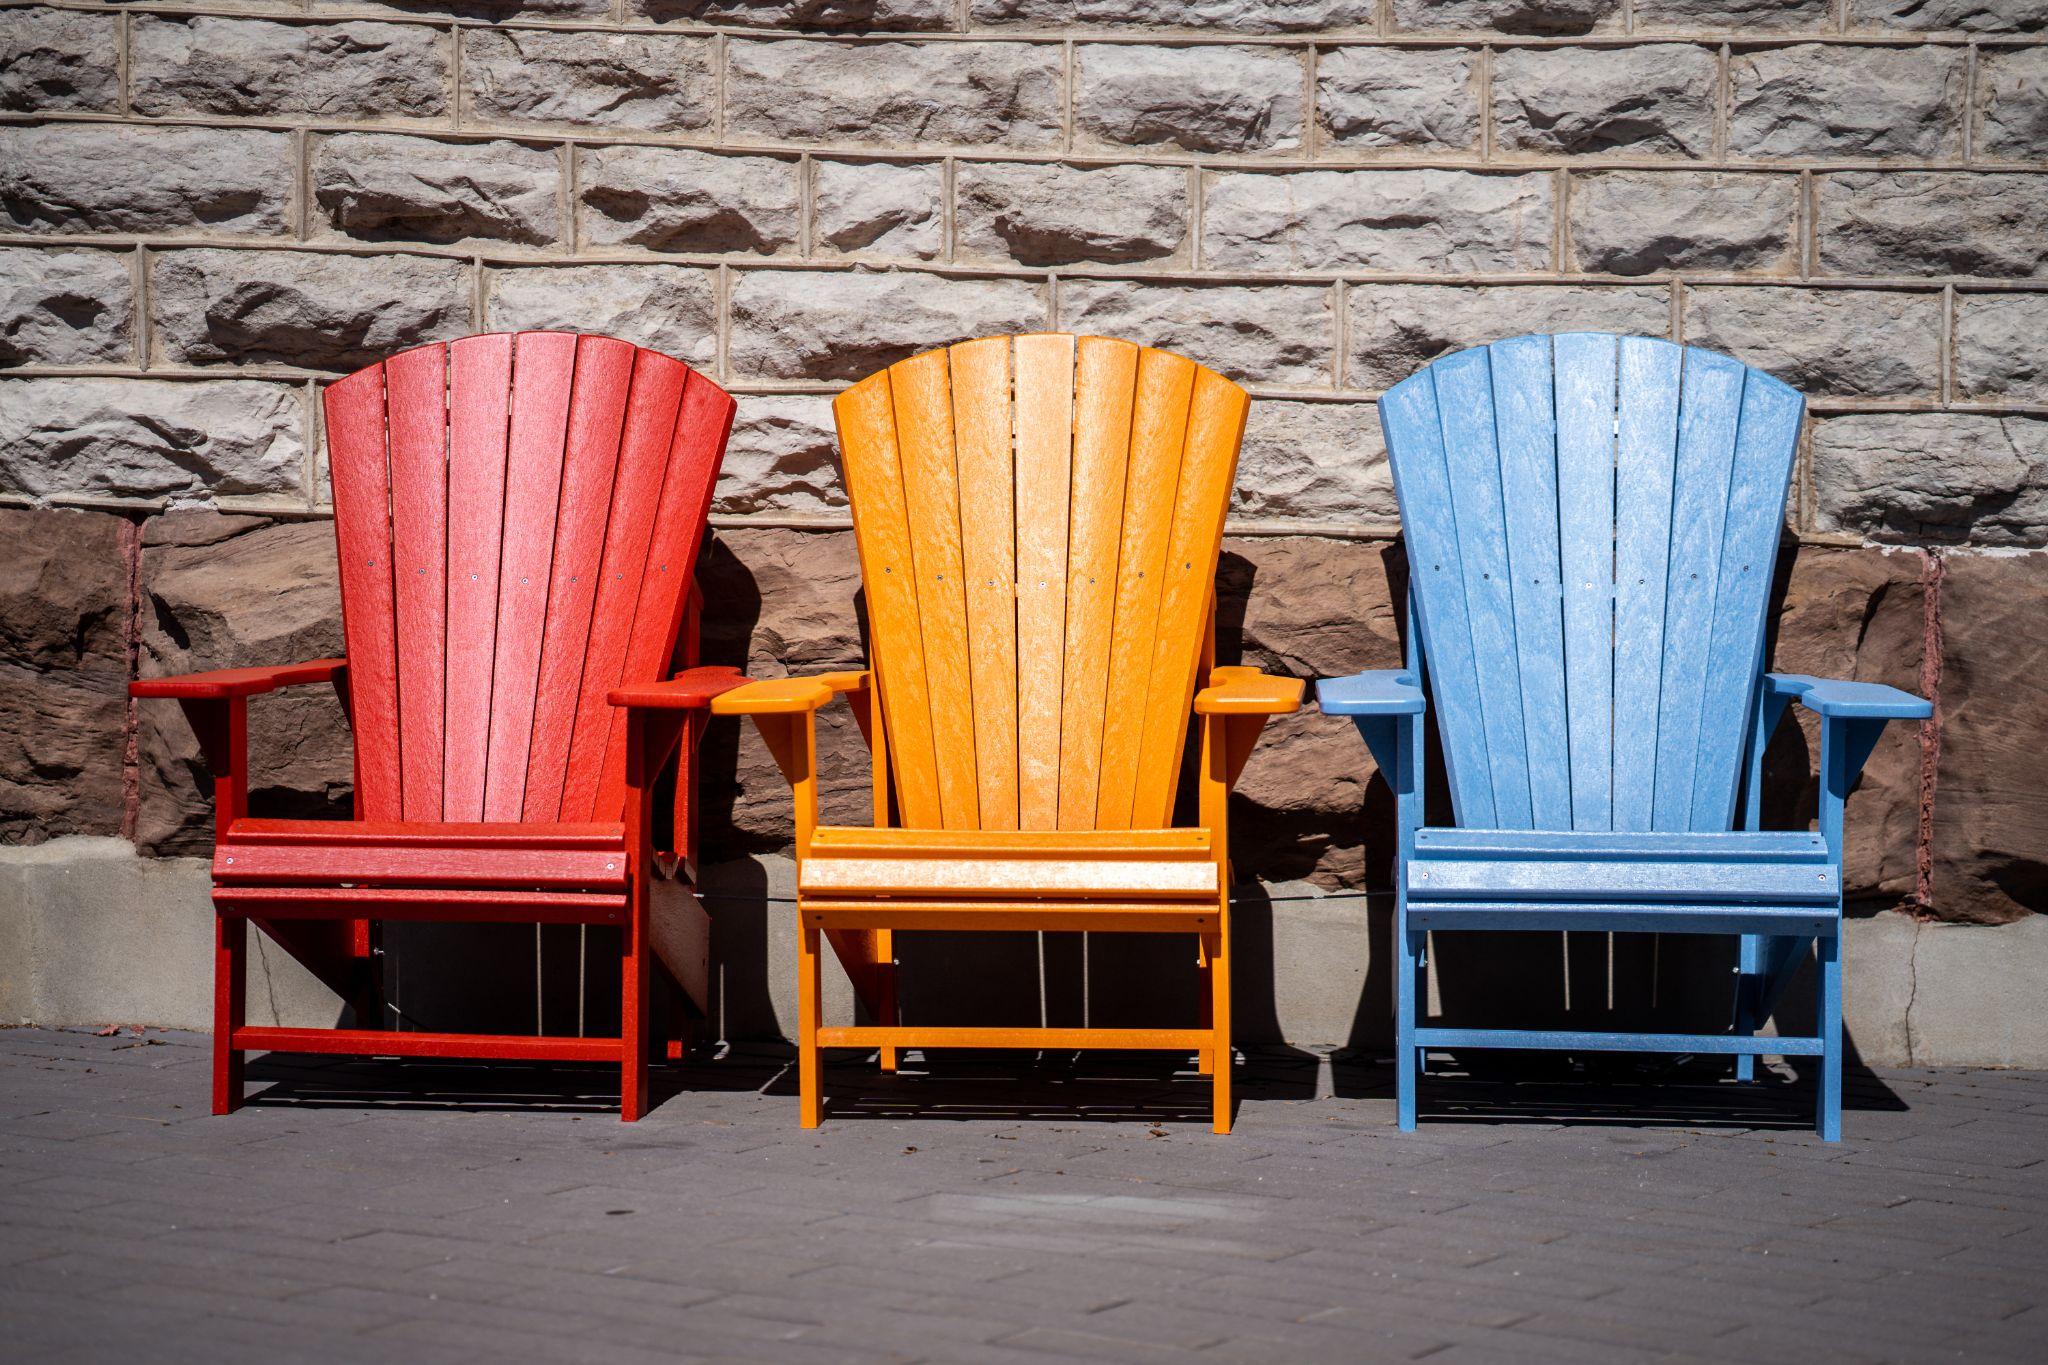 Three Wooden outdoor garden chairs, one red, one orange and one blue, sitting on black brick floor with a sandstone wall behind them